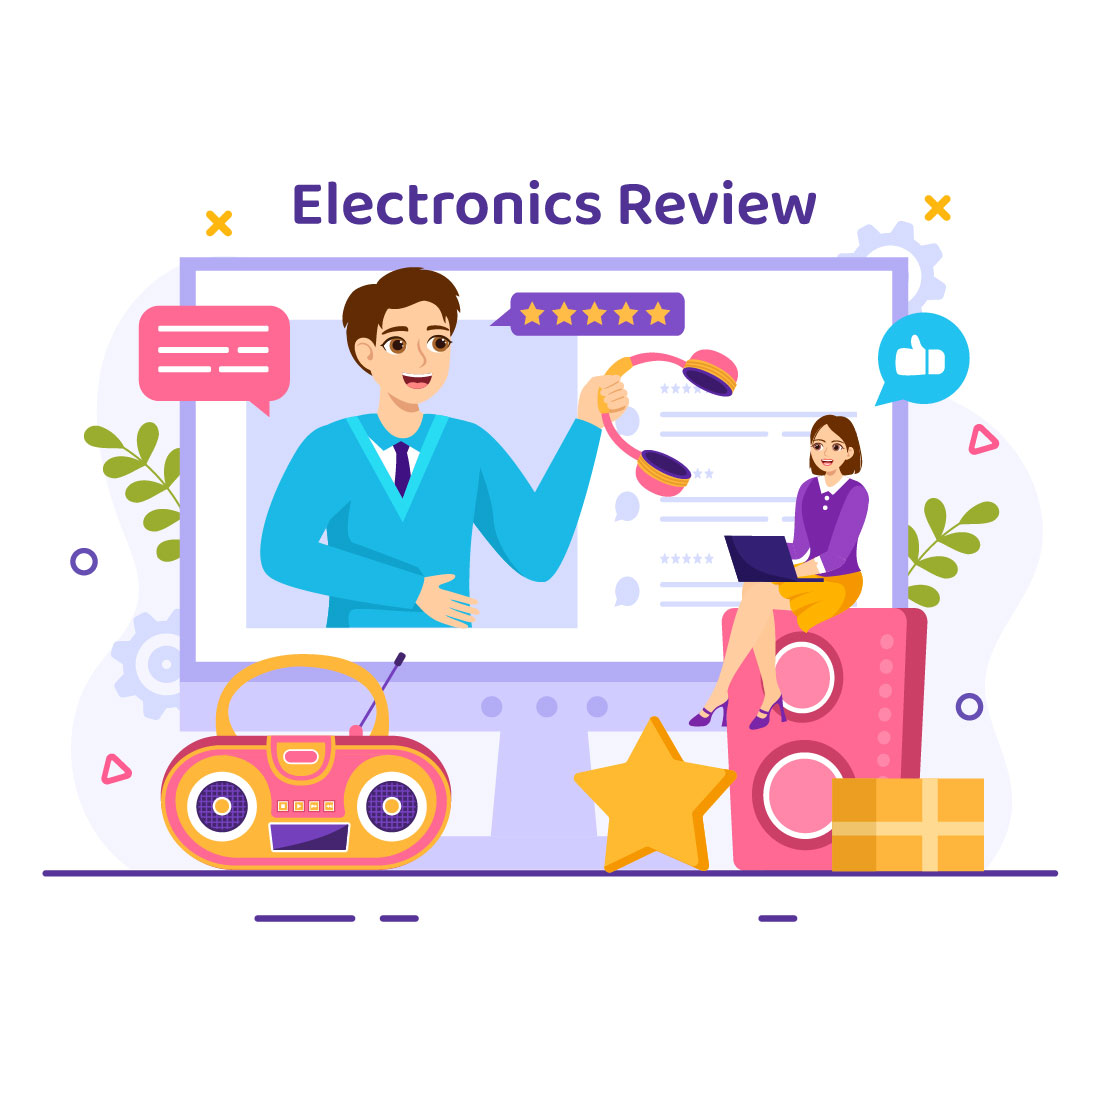 12 Electronics Review Illustration cover image.